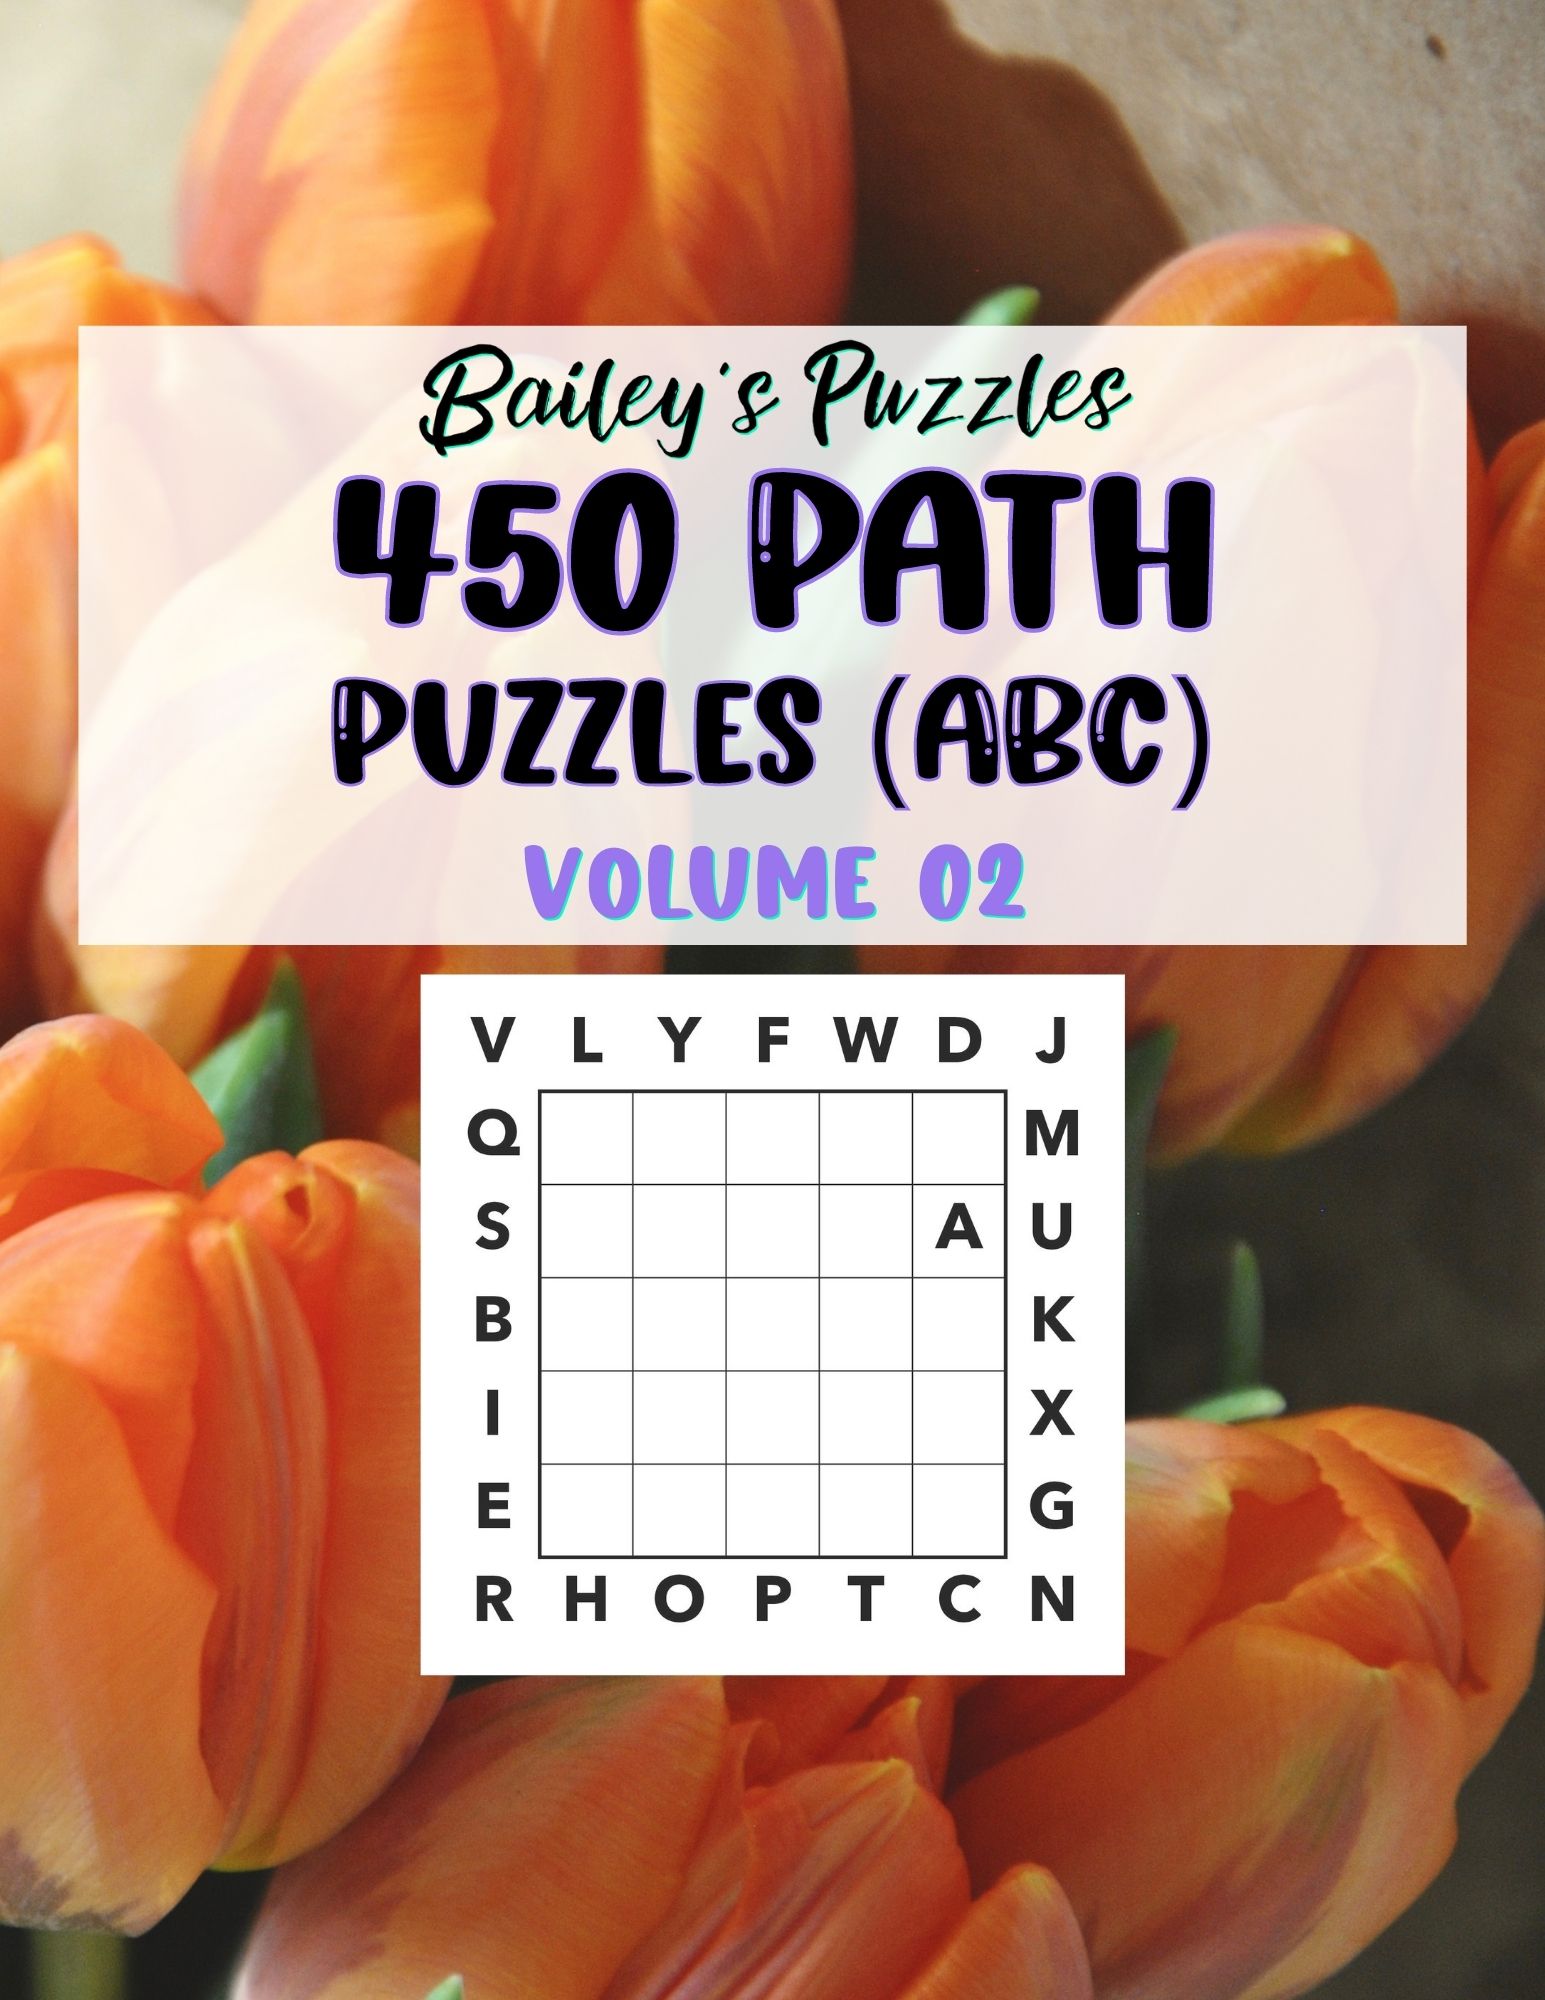 Front Cover - 450 Path Puzzles (ABC) volume 02